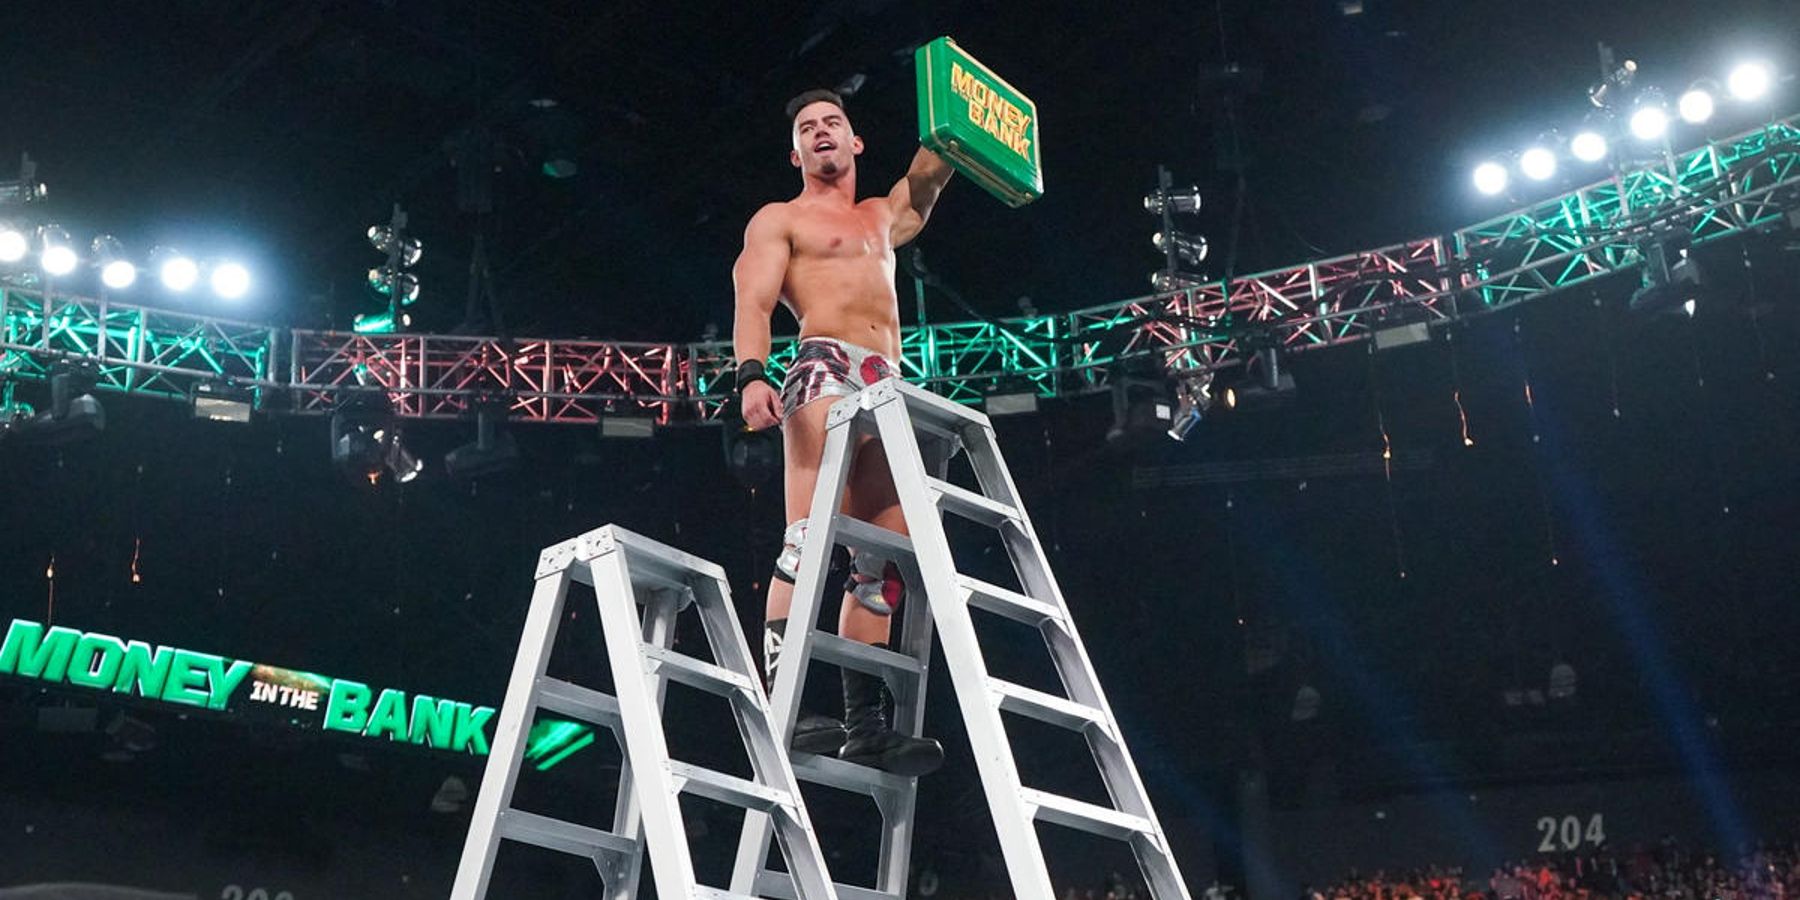 Austin Theory smugly celebrates after winning the men's Money In The Bank ladder match in 2022.